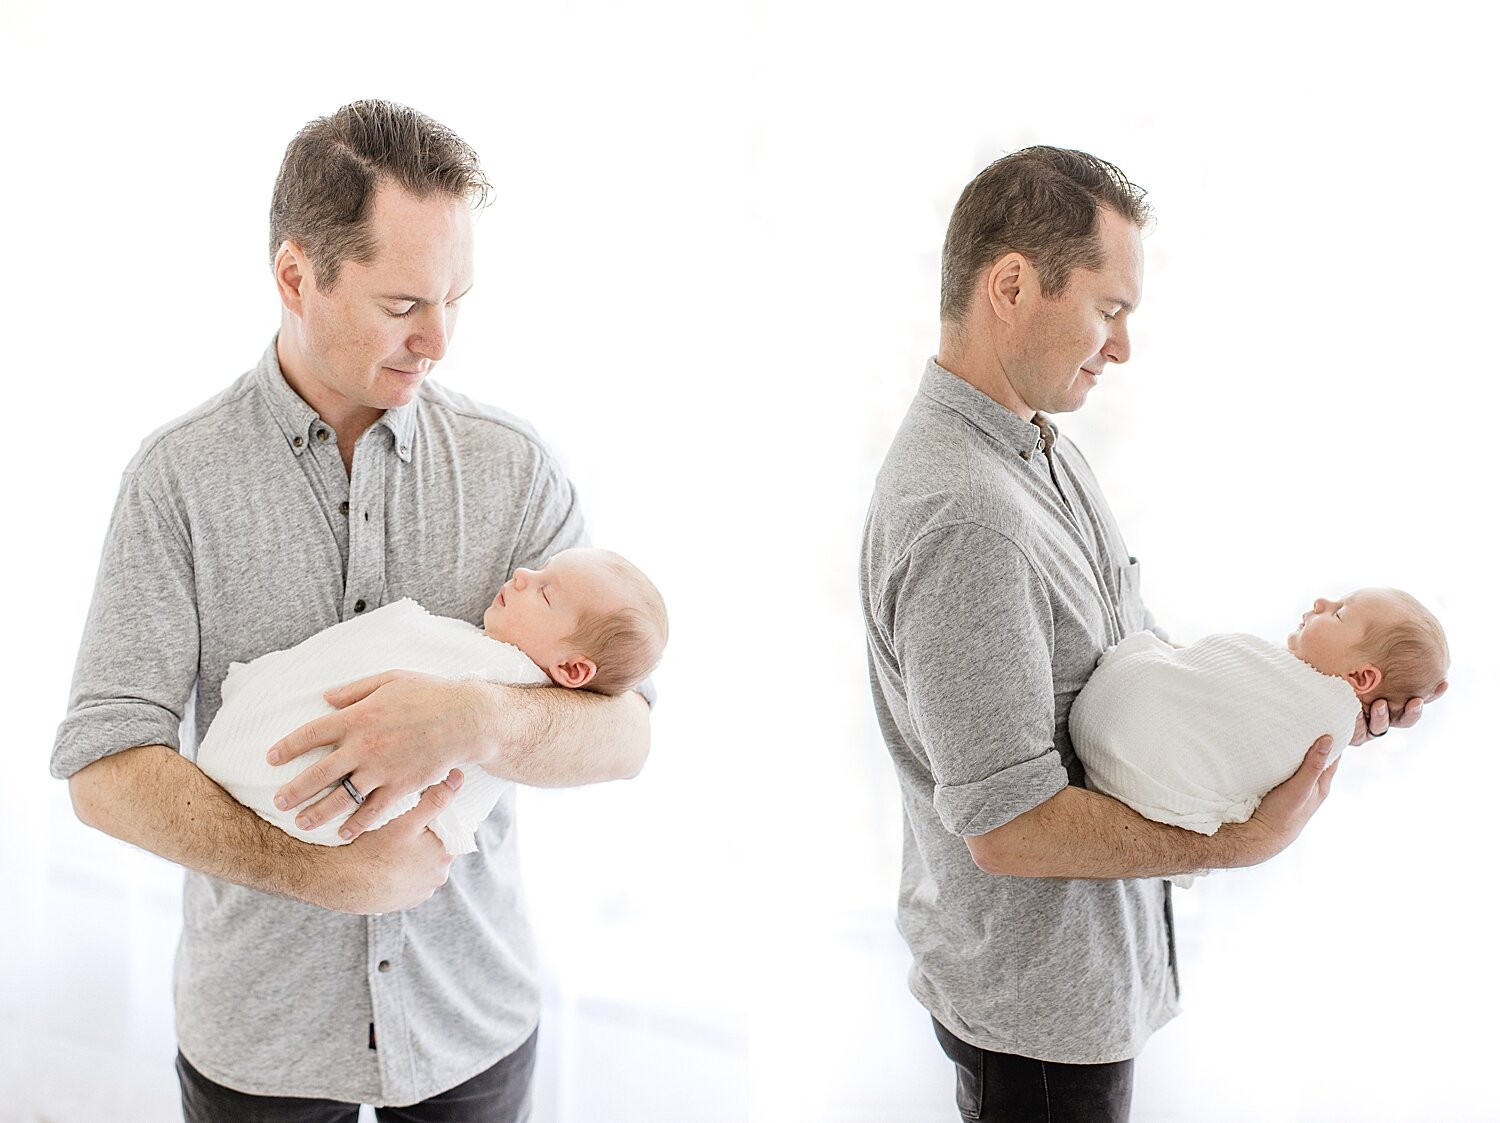 Dad with baby boy during newborn session in Newport Beach studio. Photo by Ambre Williams Photography.